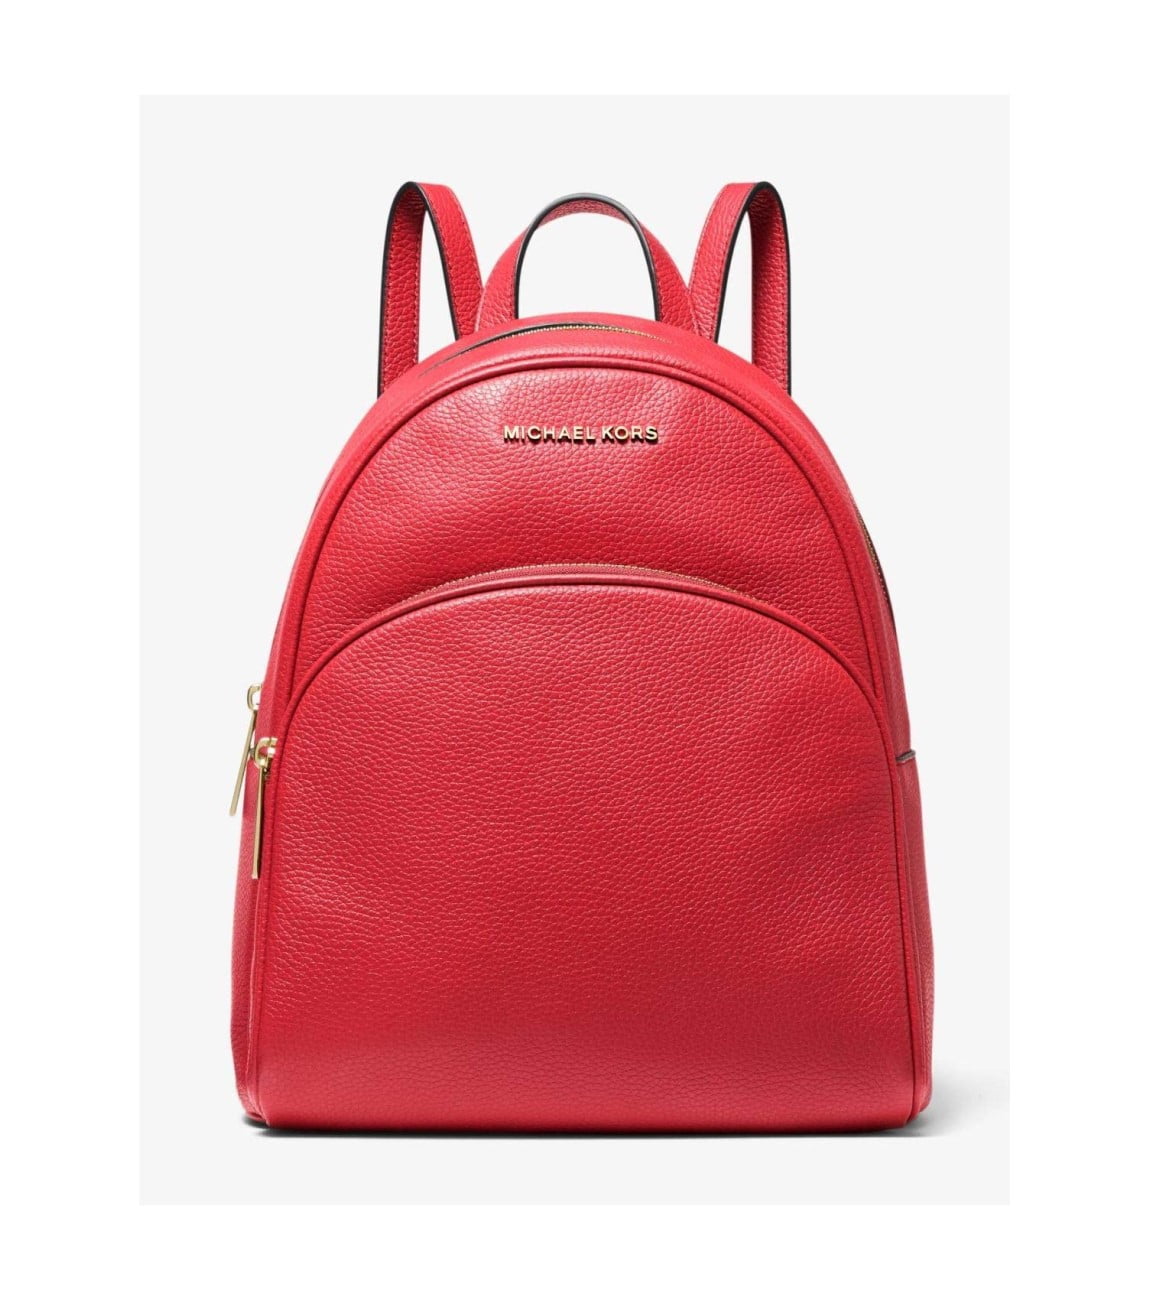 Michael Michael Kors Abbey Medium Leather Backpack 30S0Gayb6L Bright Red -  